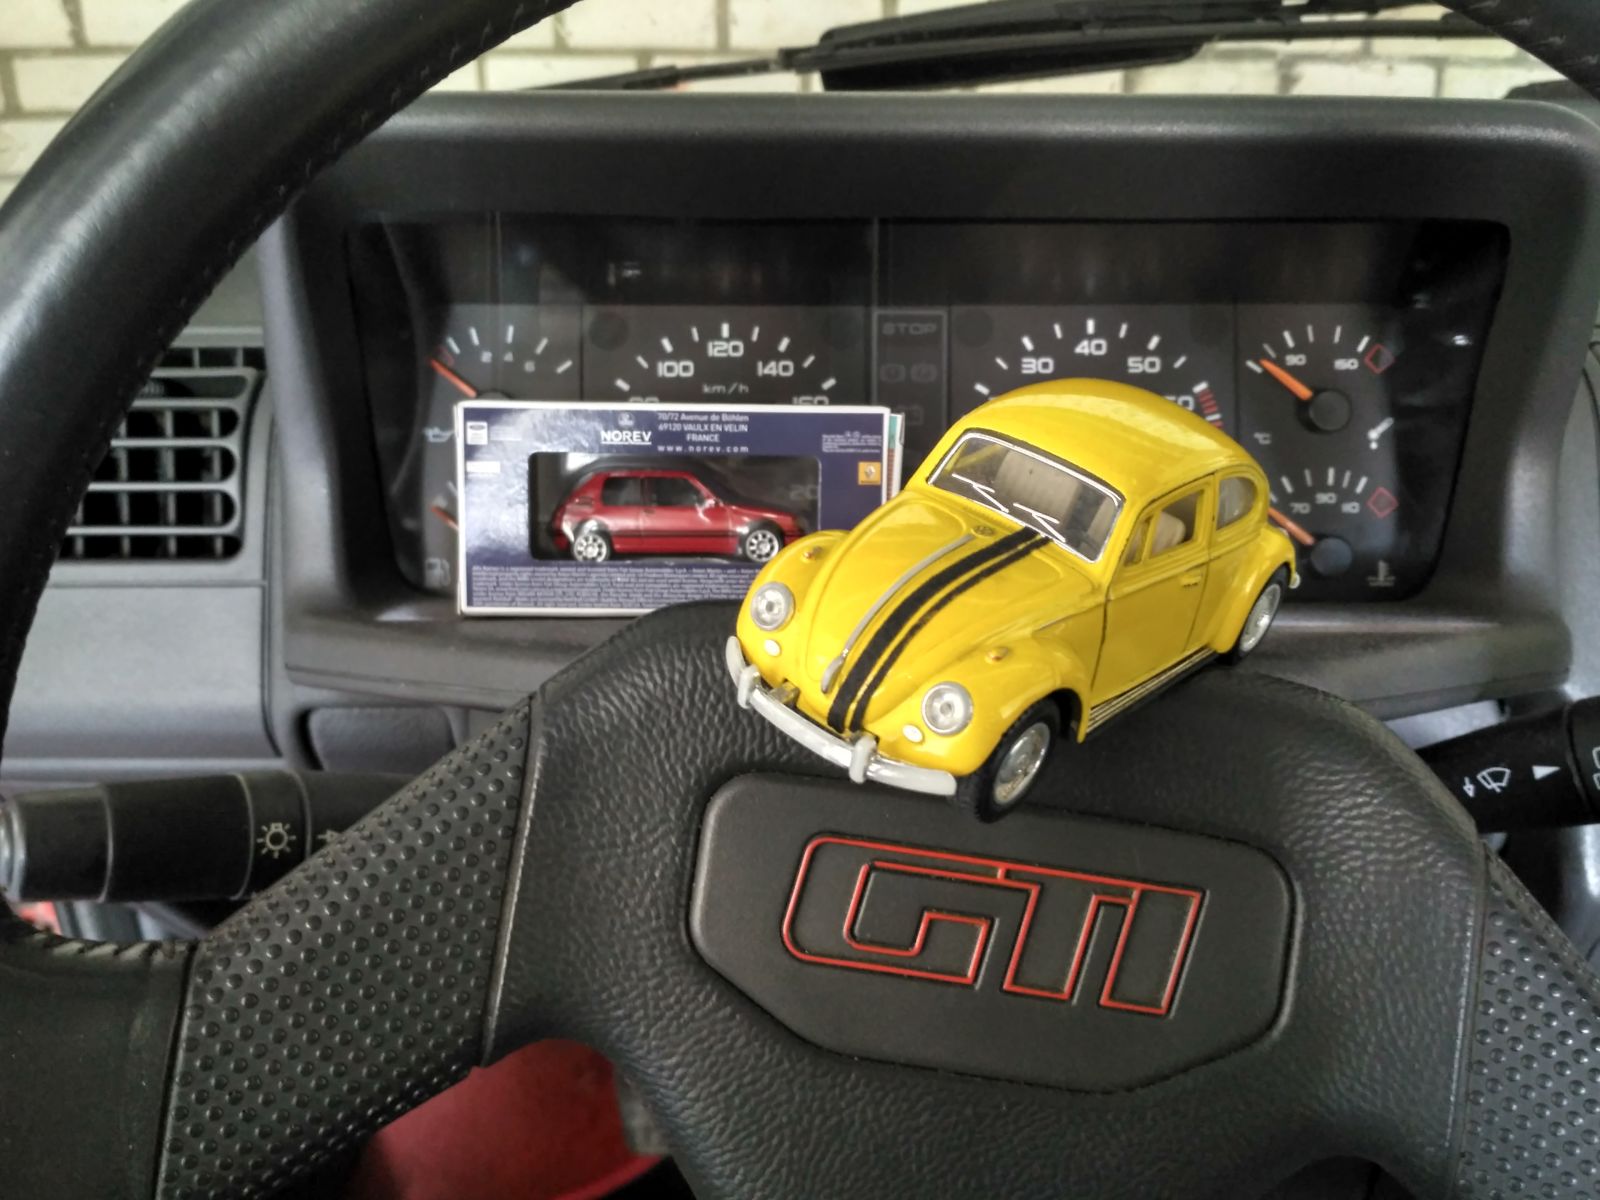 Torchbug realizes this GTi is even better to drive than its own offspring